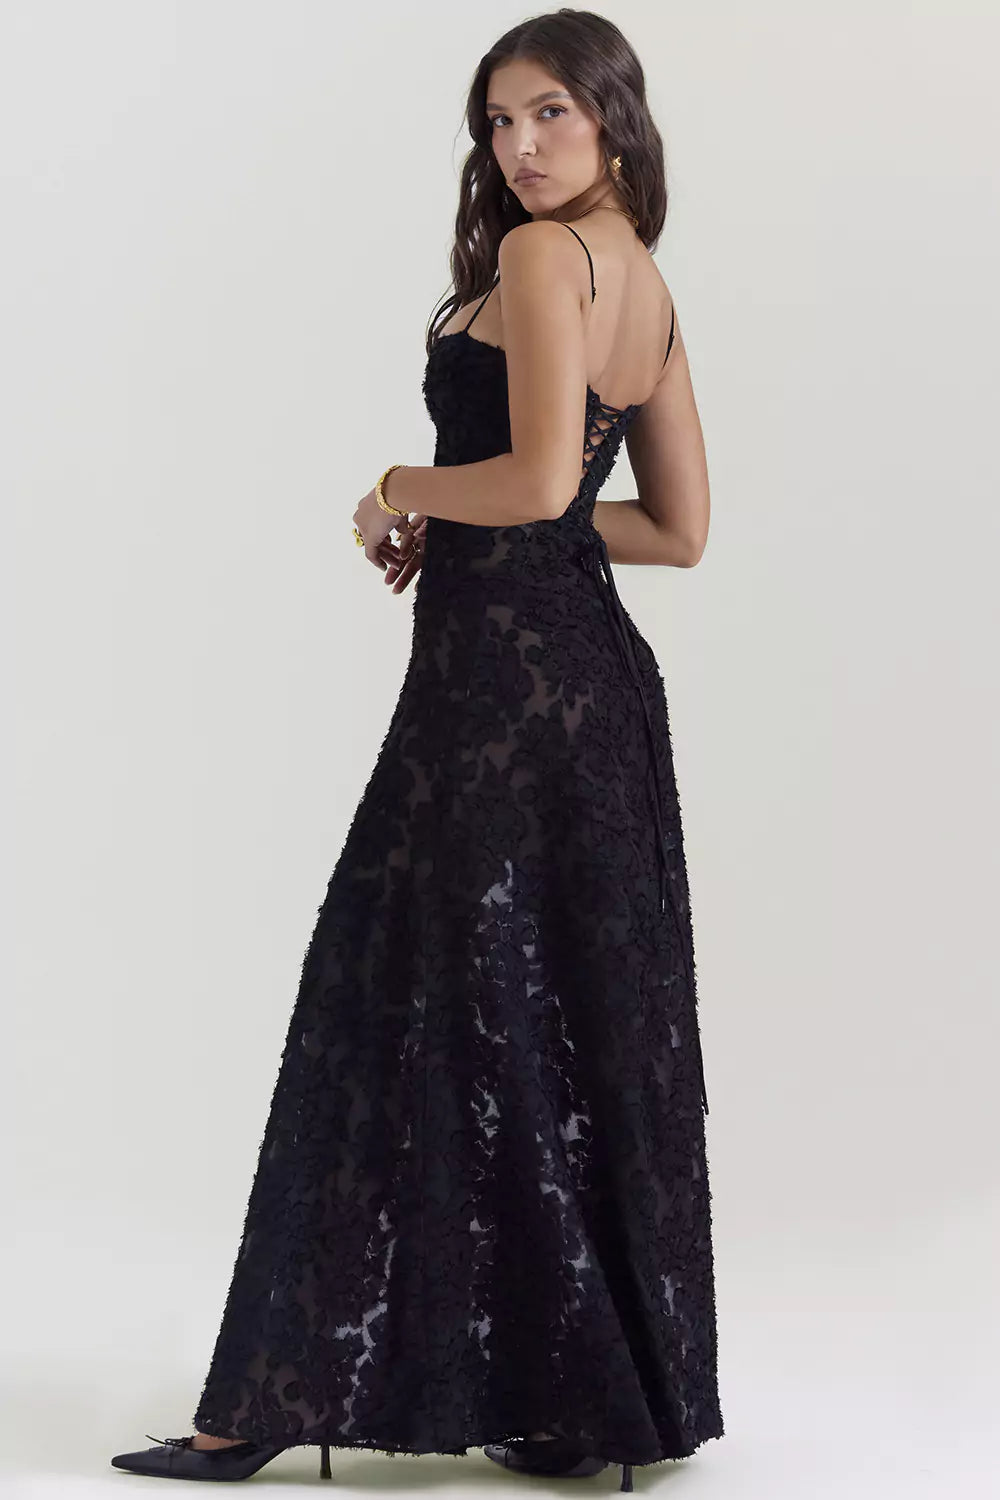 The back view of a woman wearing a black lace dress.